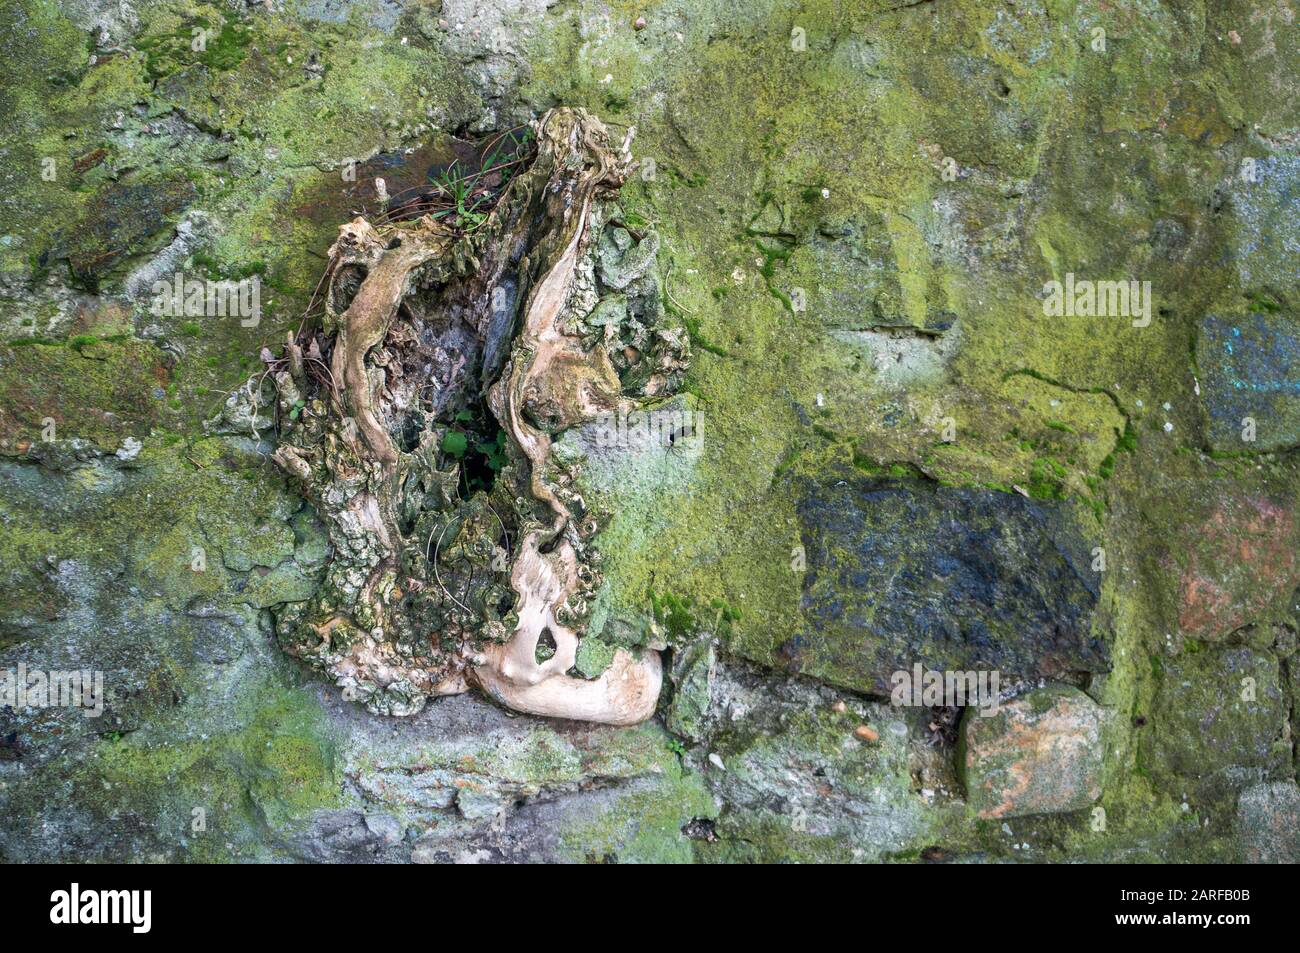 Old open tree root breaking through rustic stone wall covered in green moss and algae Stock Photo